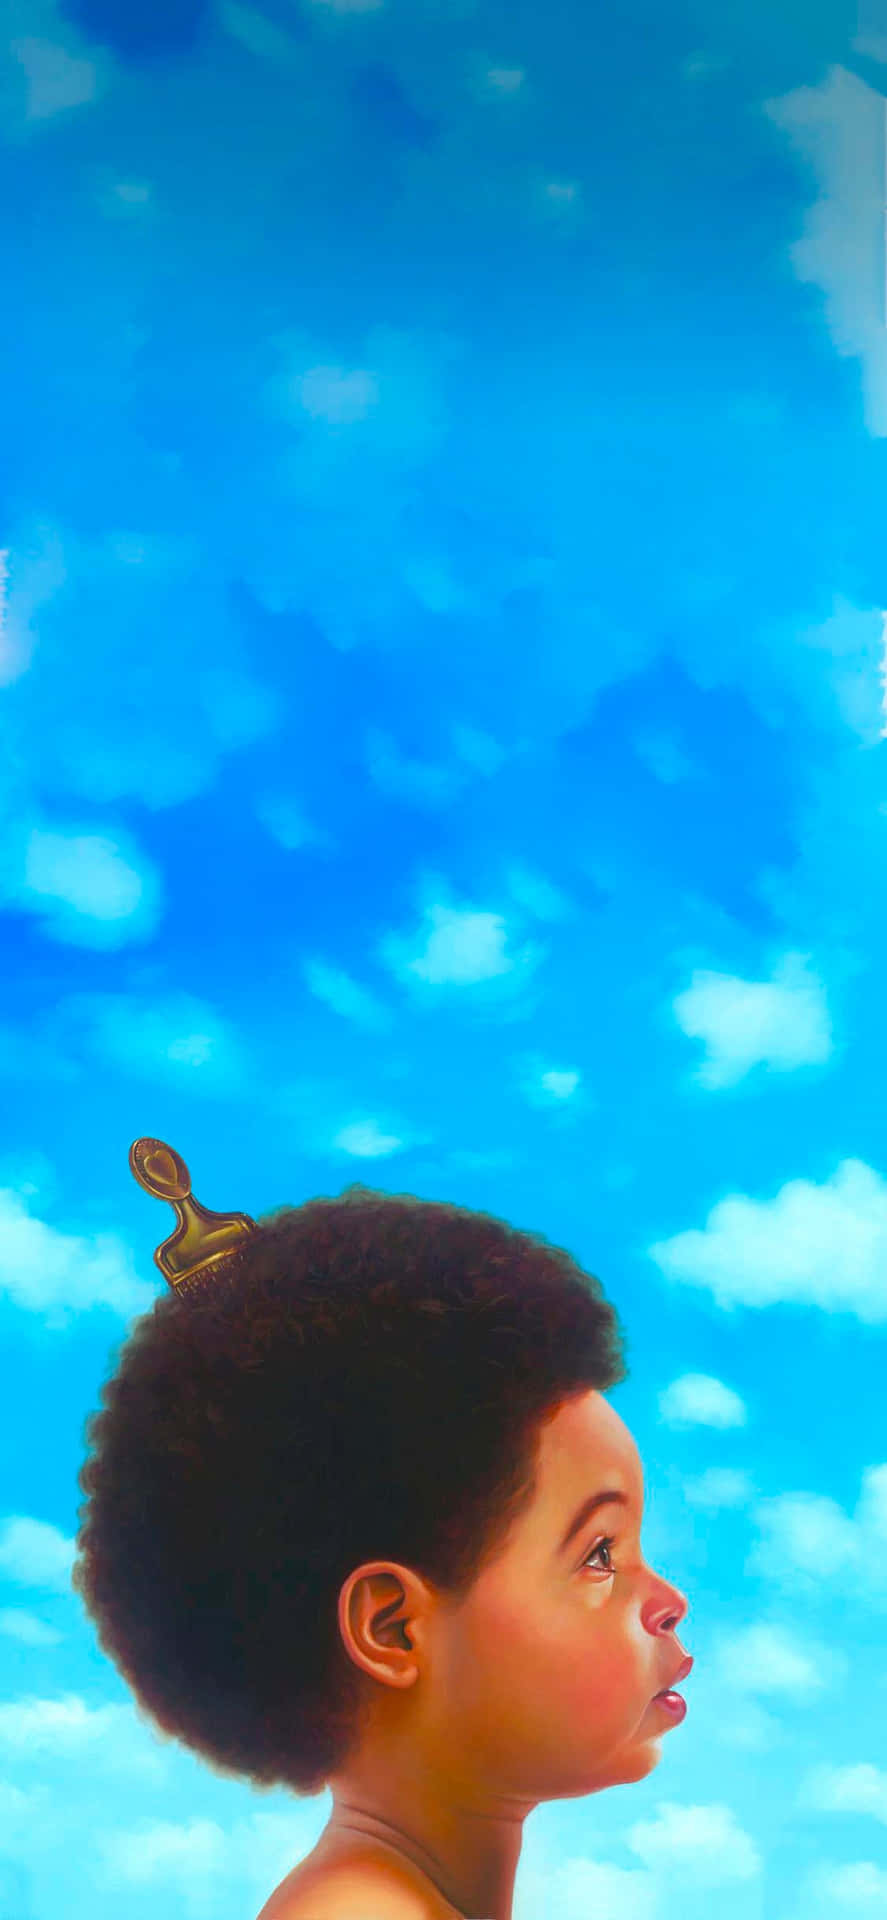 Drake releases his album Nothing Was The Same Wallpaper